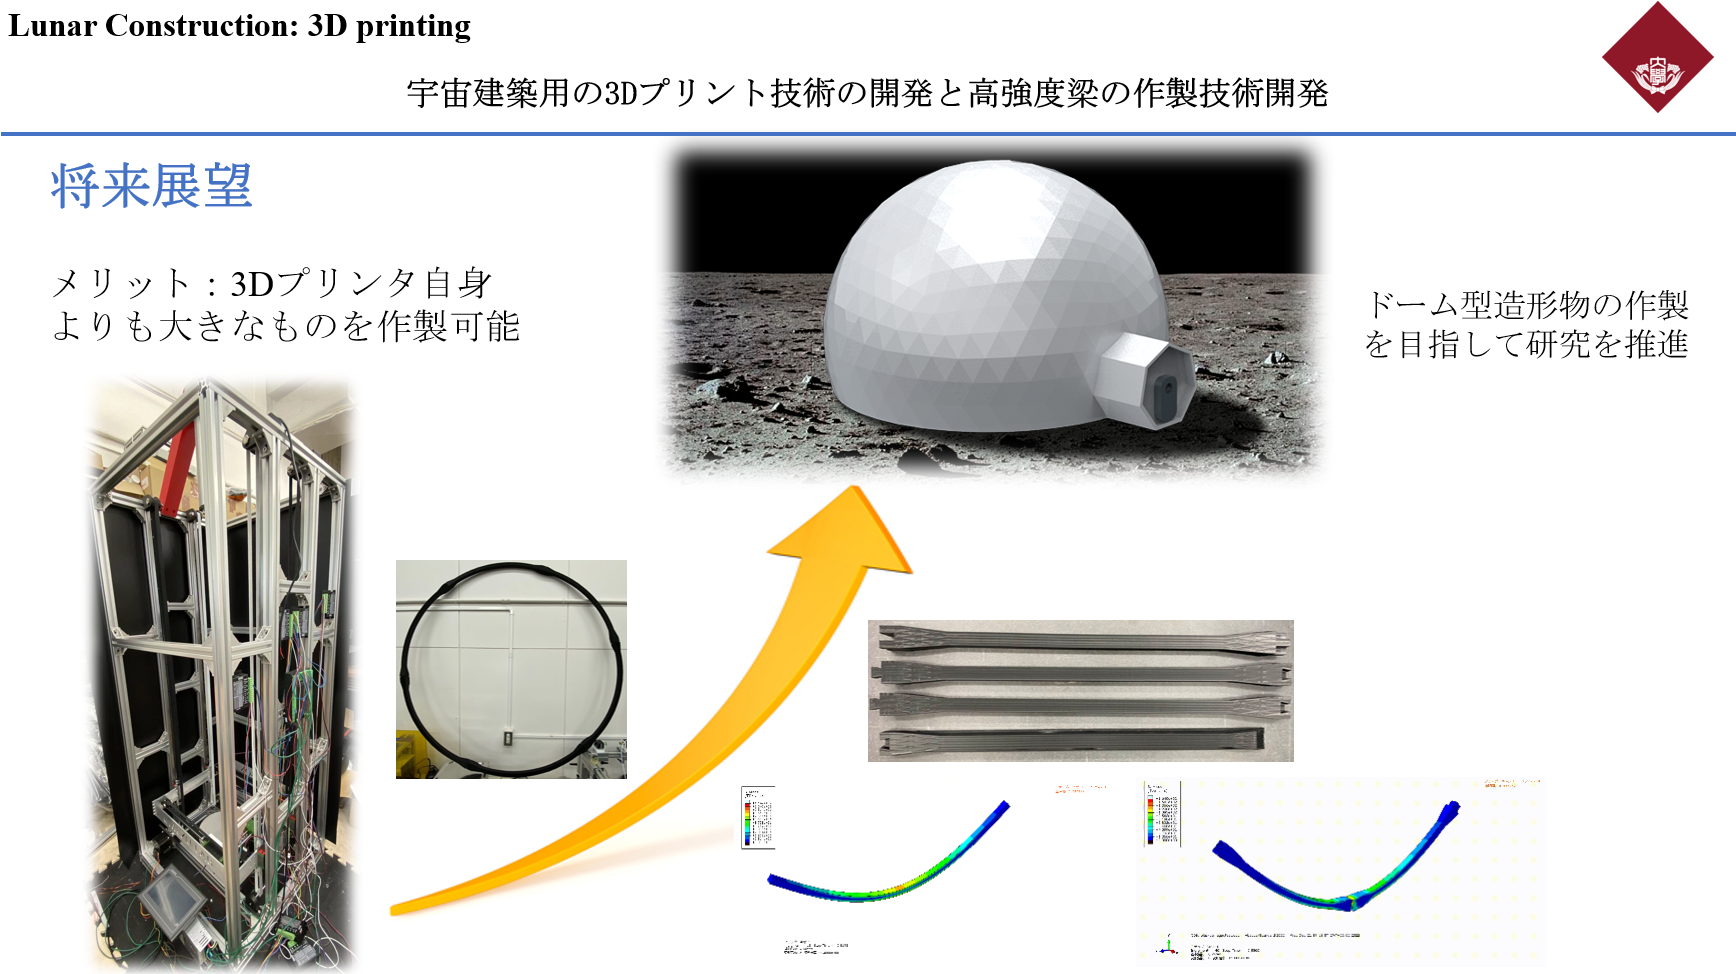 3D printing for lunar applications